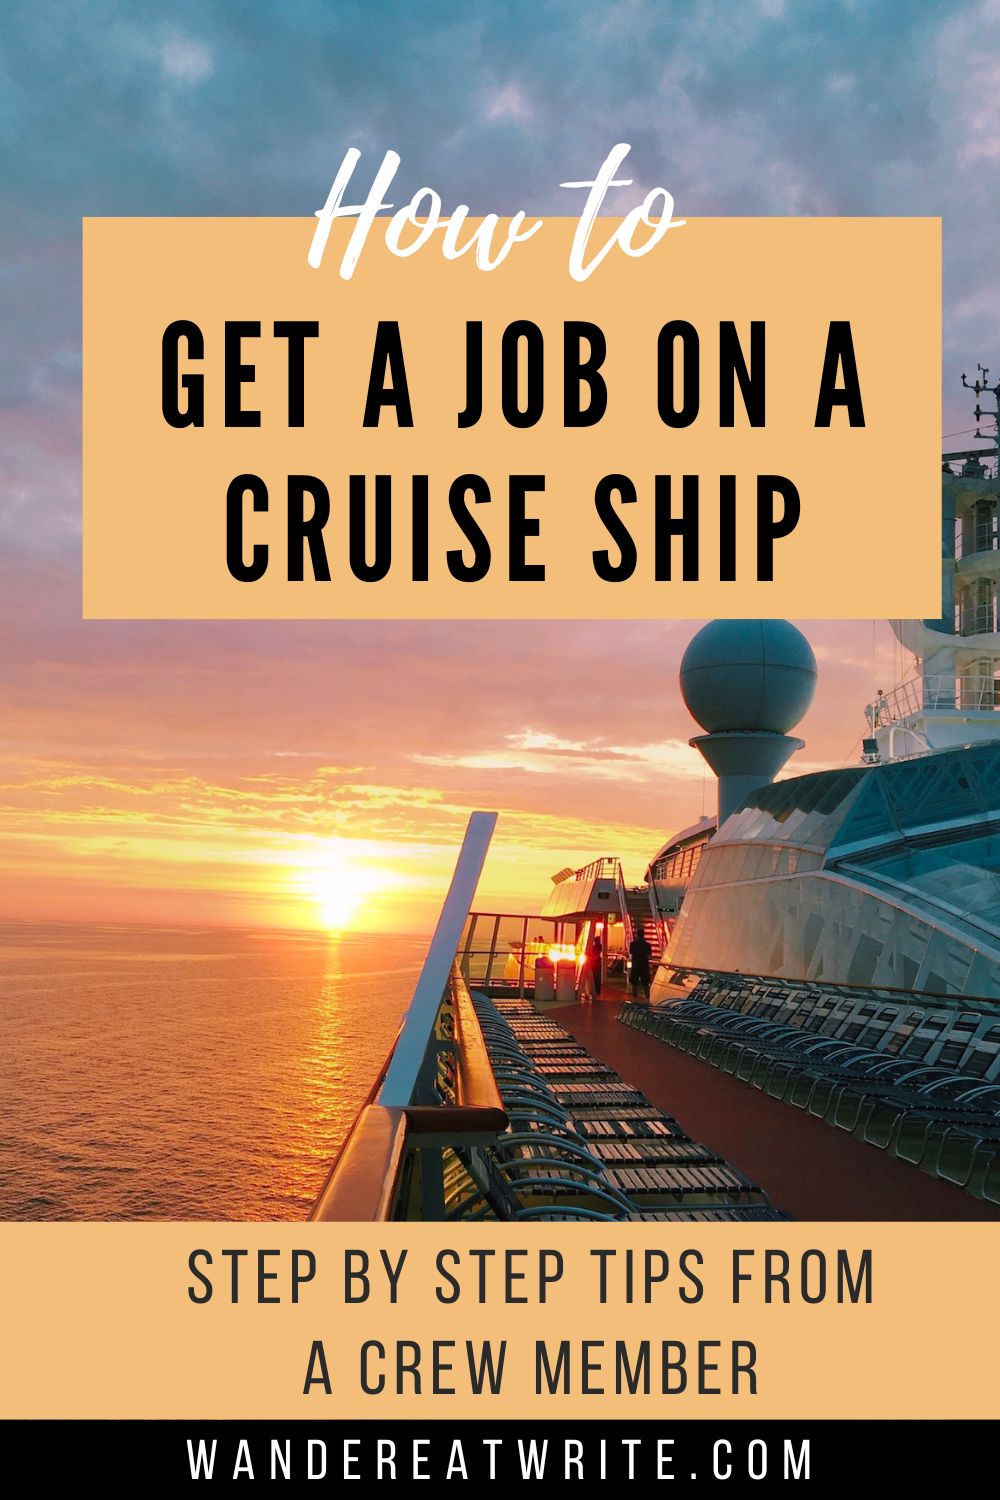 Pin text: How to get a job on a cruise ship: Step by step tips from a crew member. Photo: Taken on the top deck of the ship looking out at the orange sunset at sea